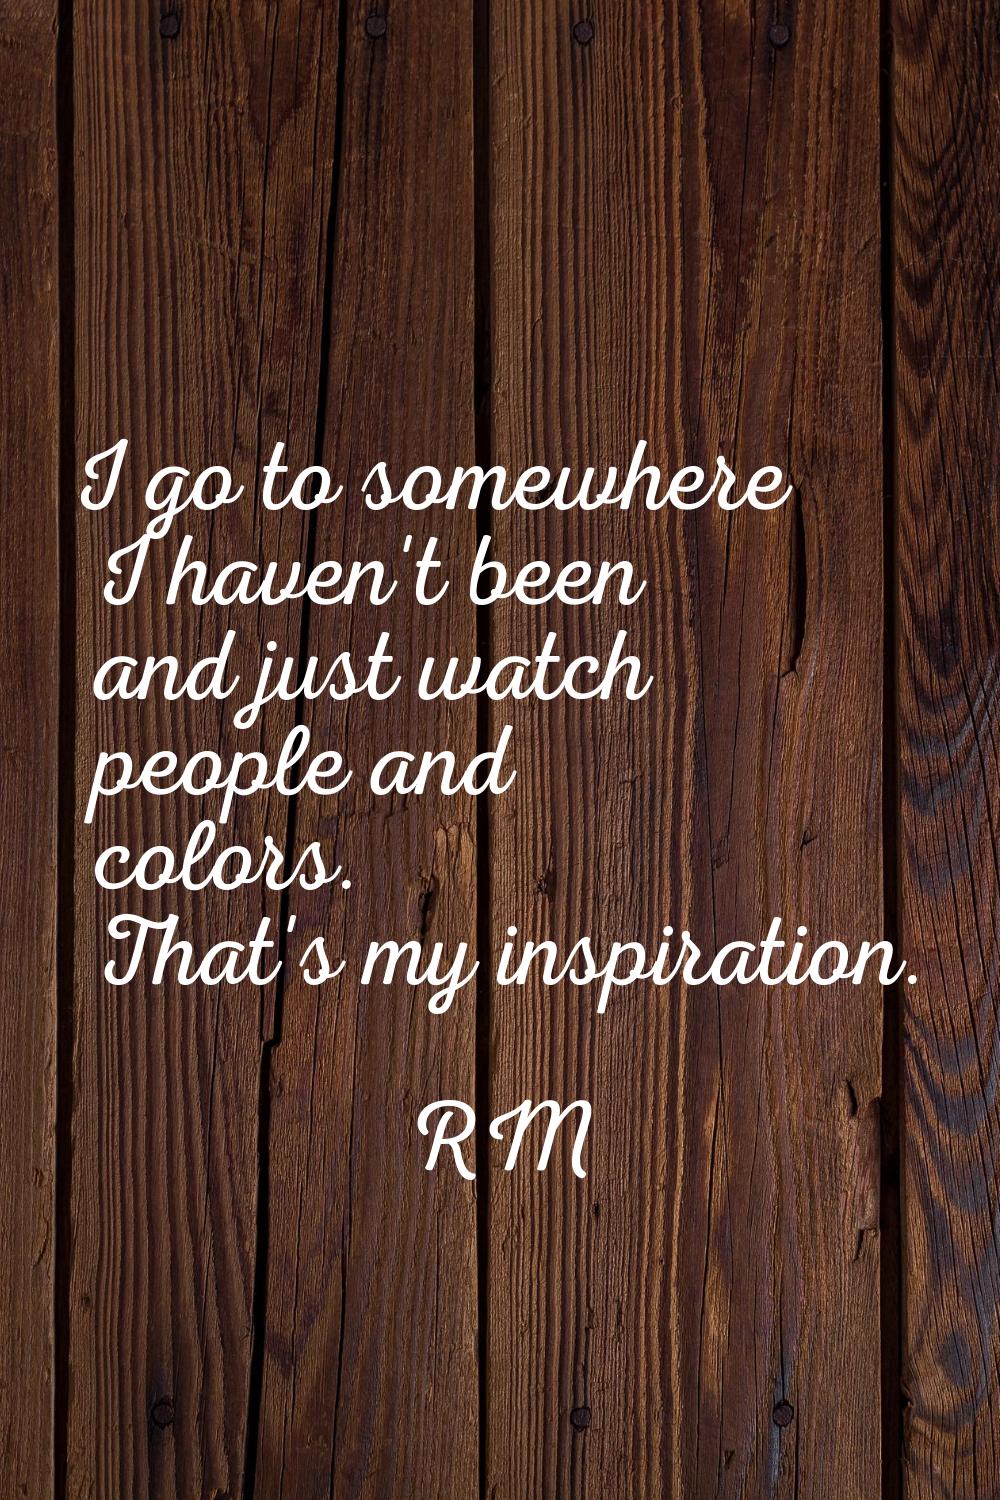 I go to somewhere I haven't been and just watch people and colors. That's my inspiration.